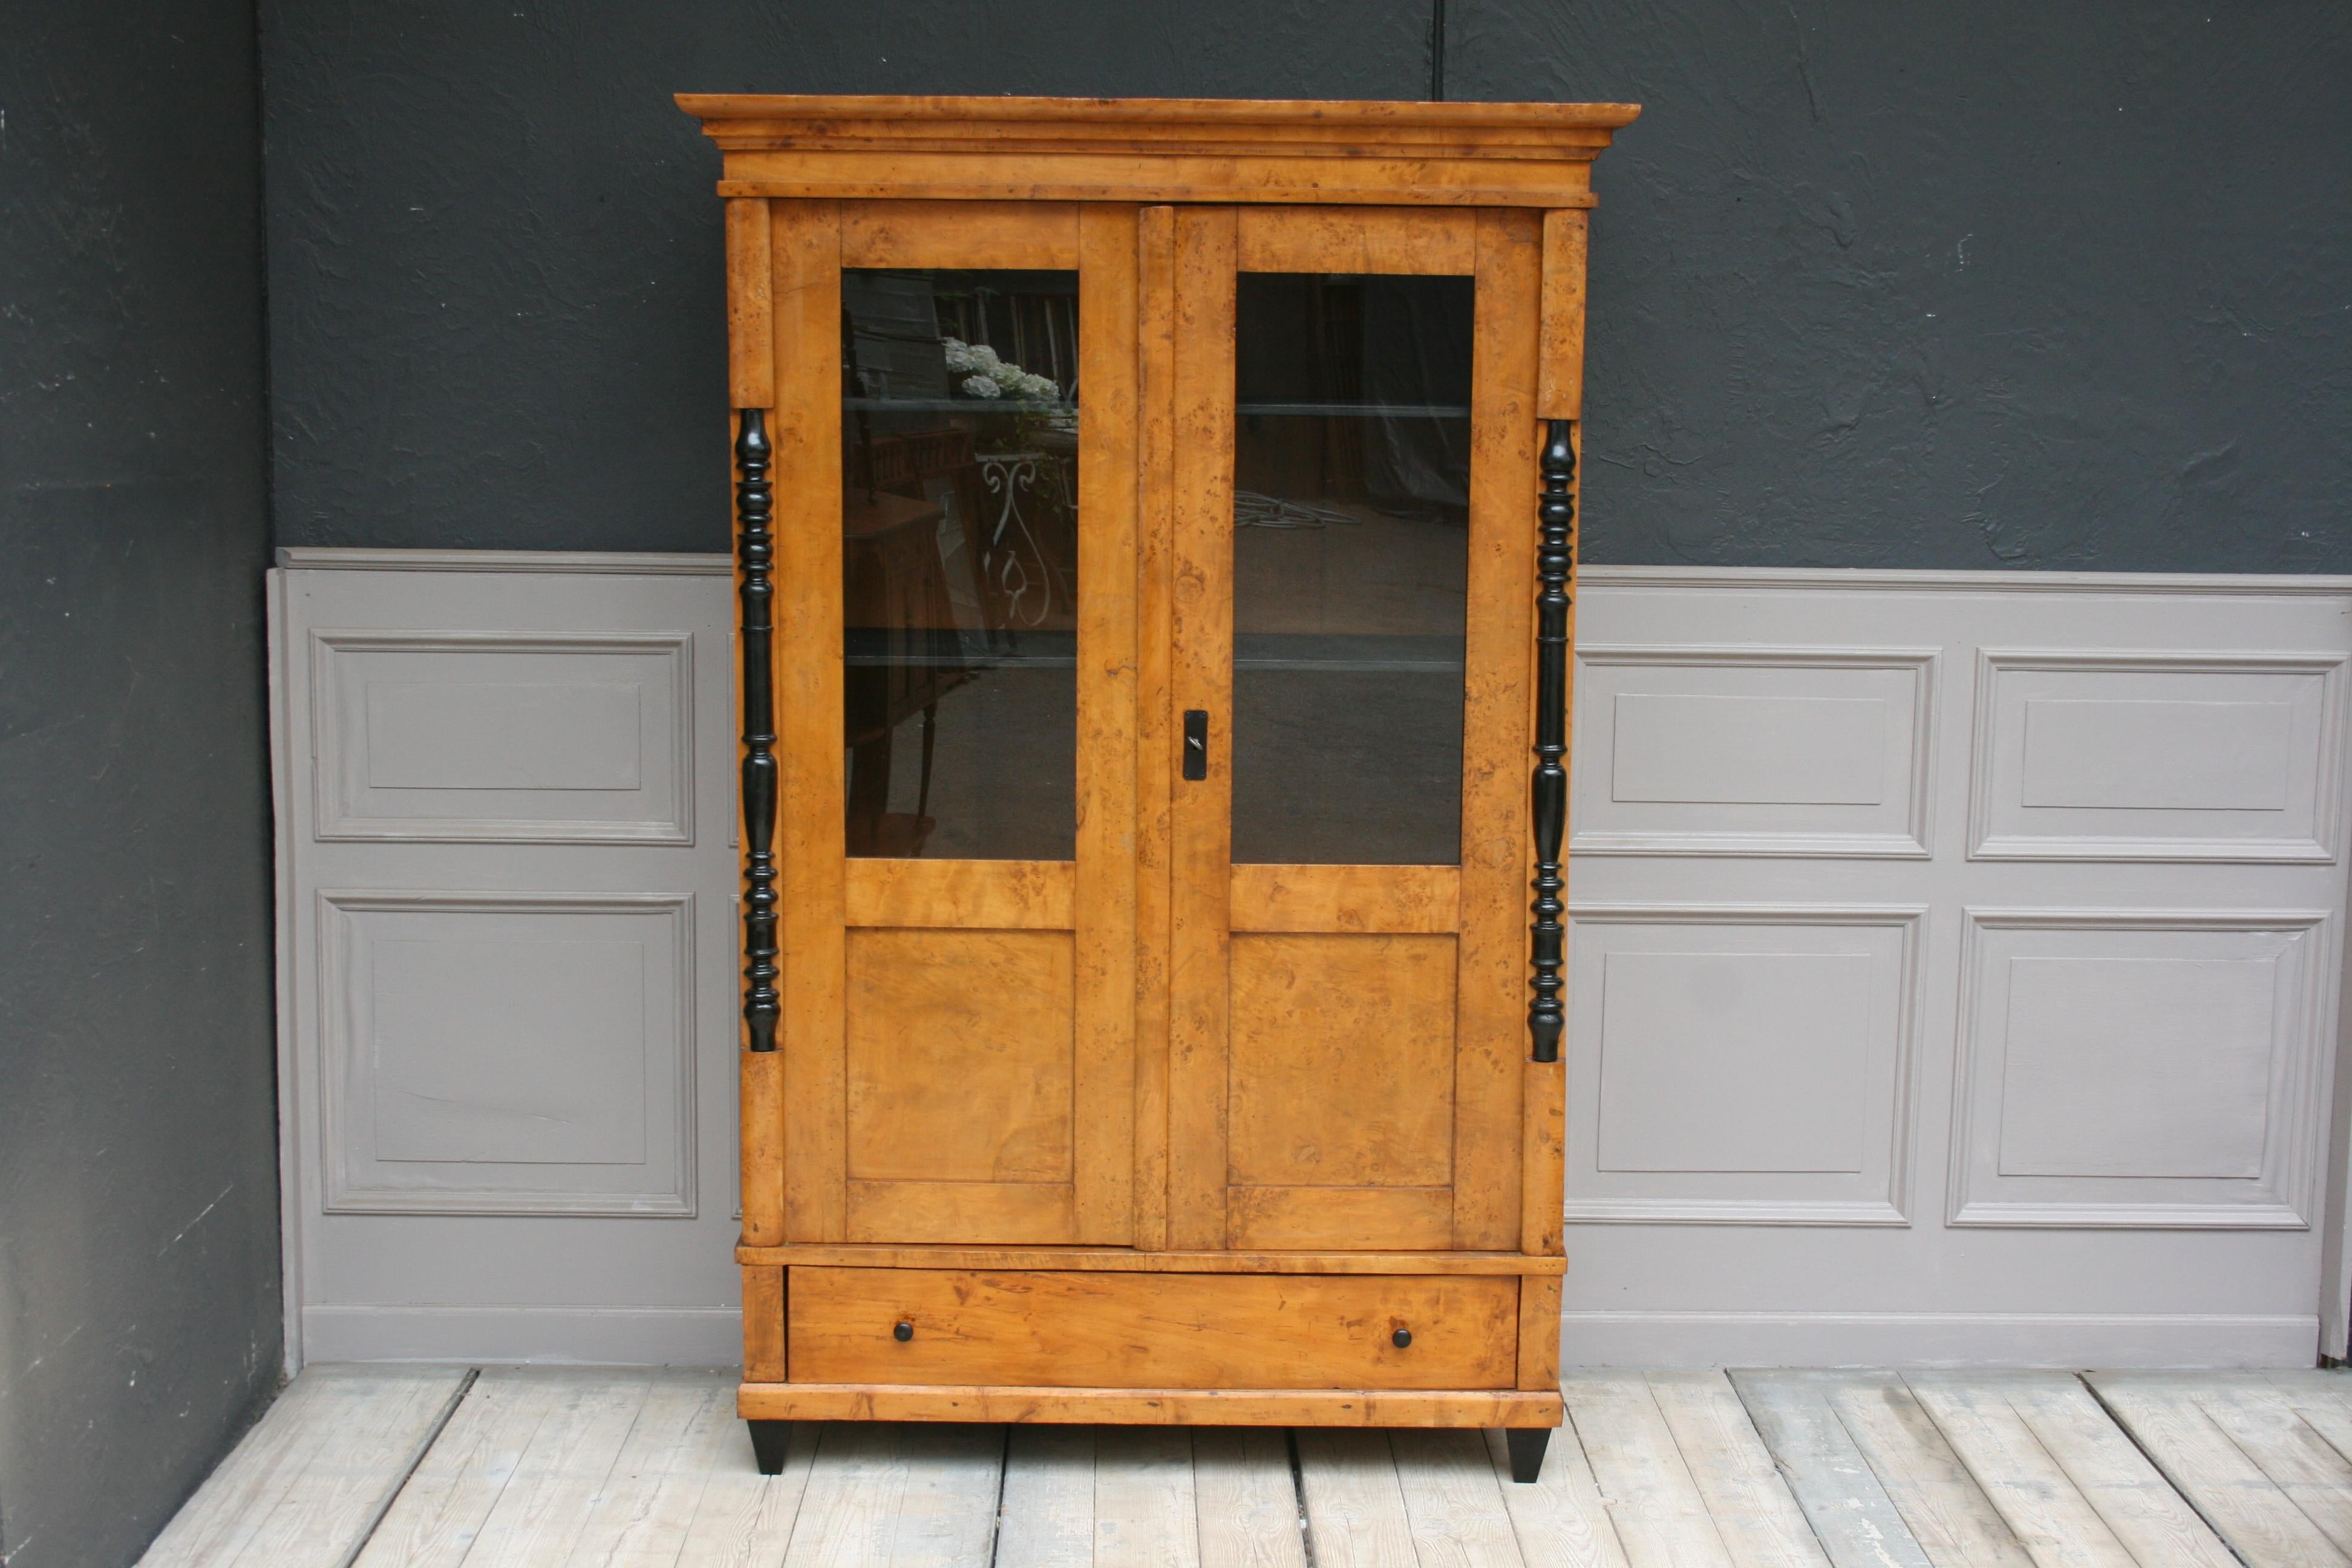 Rare German bird's eye maple Biedermeier showcase or bookcase from the 1st half of the 19th century. Solid maple and maple veneer on pine.

Two-door body with base drawer standing on four ebonized pointed feet. Pilaster strips decorated with